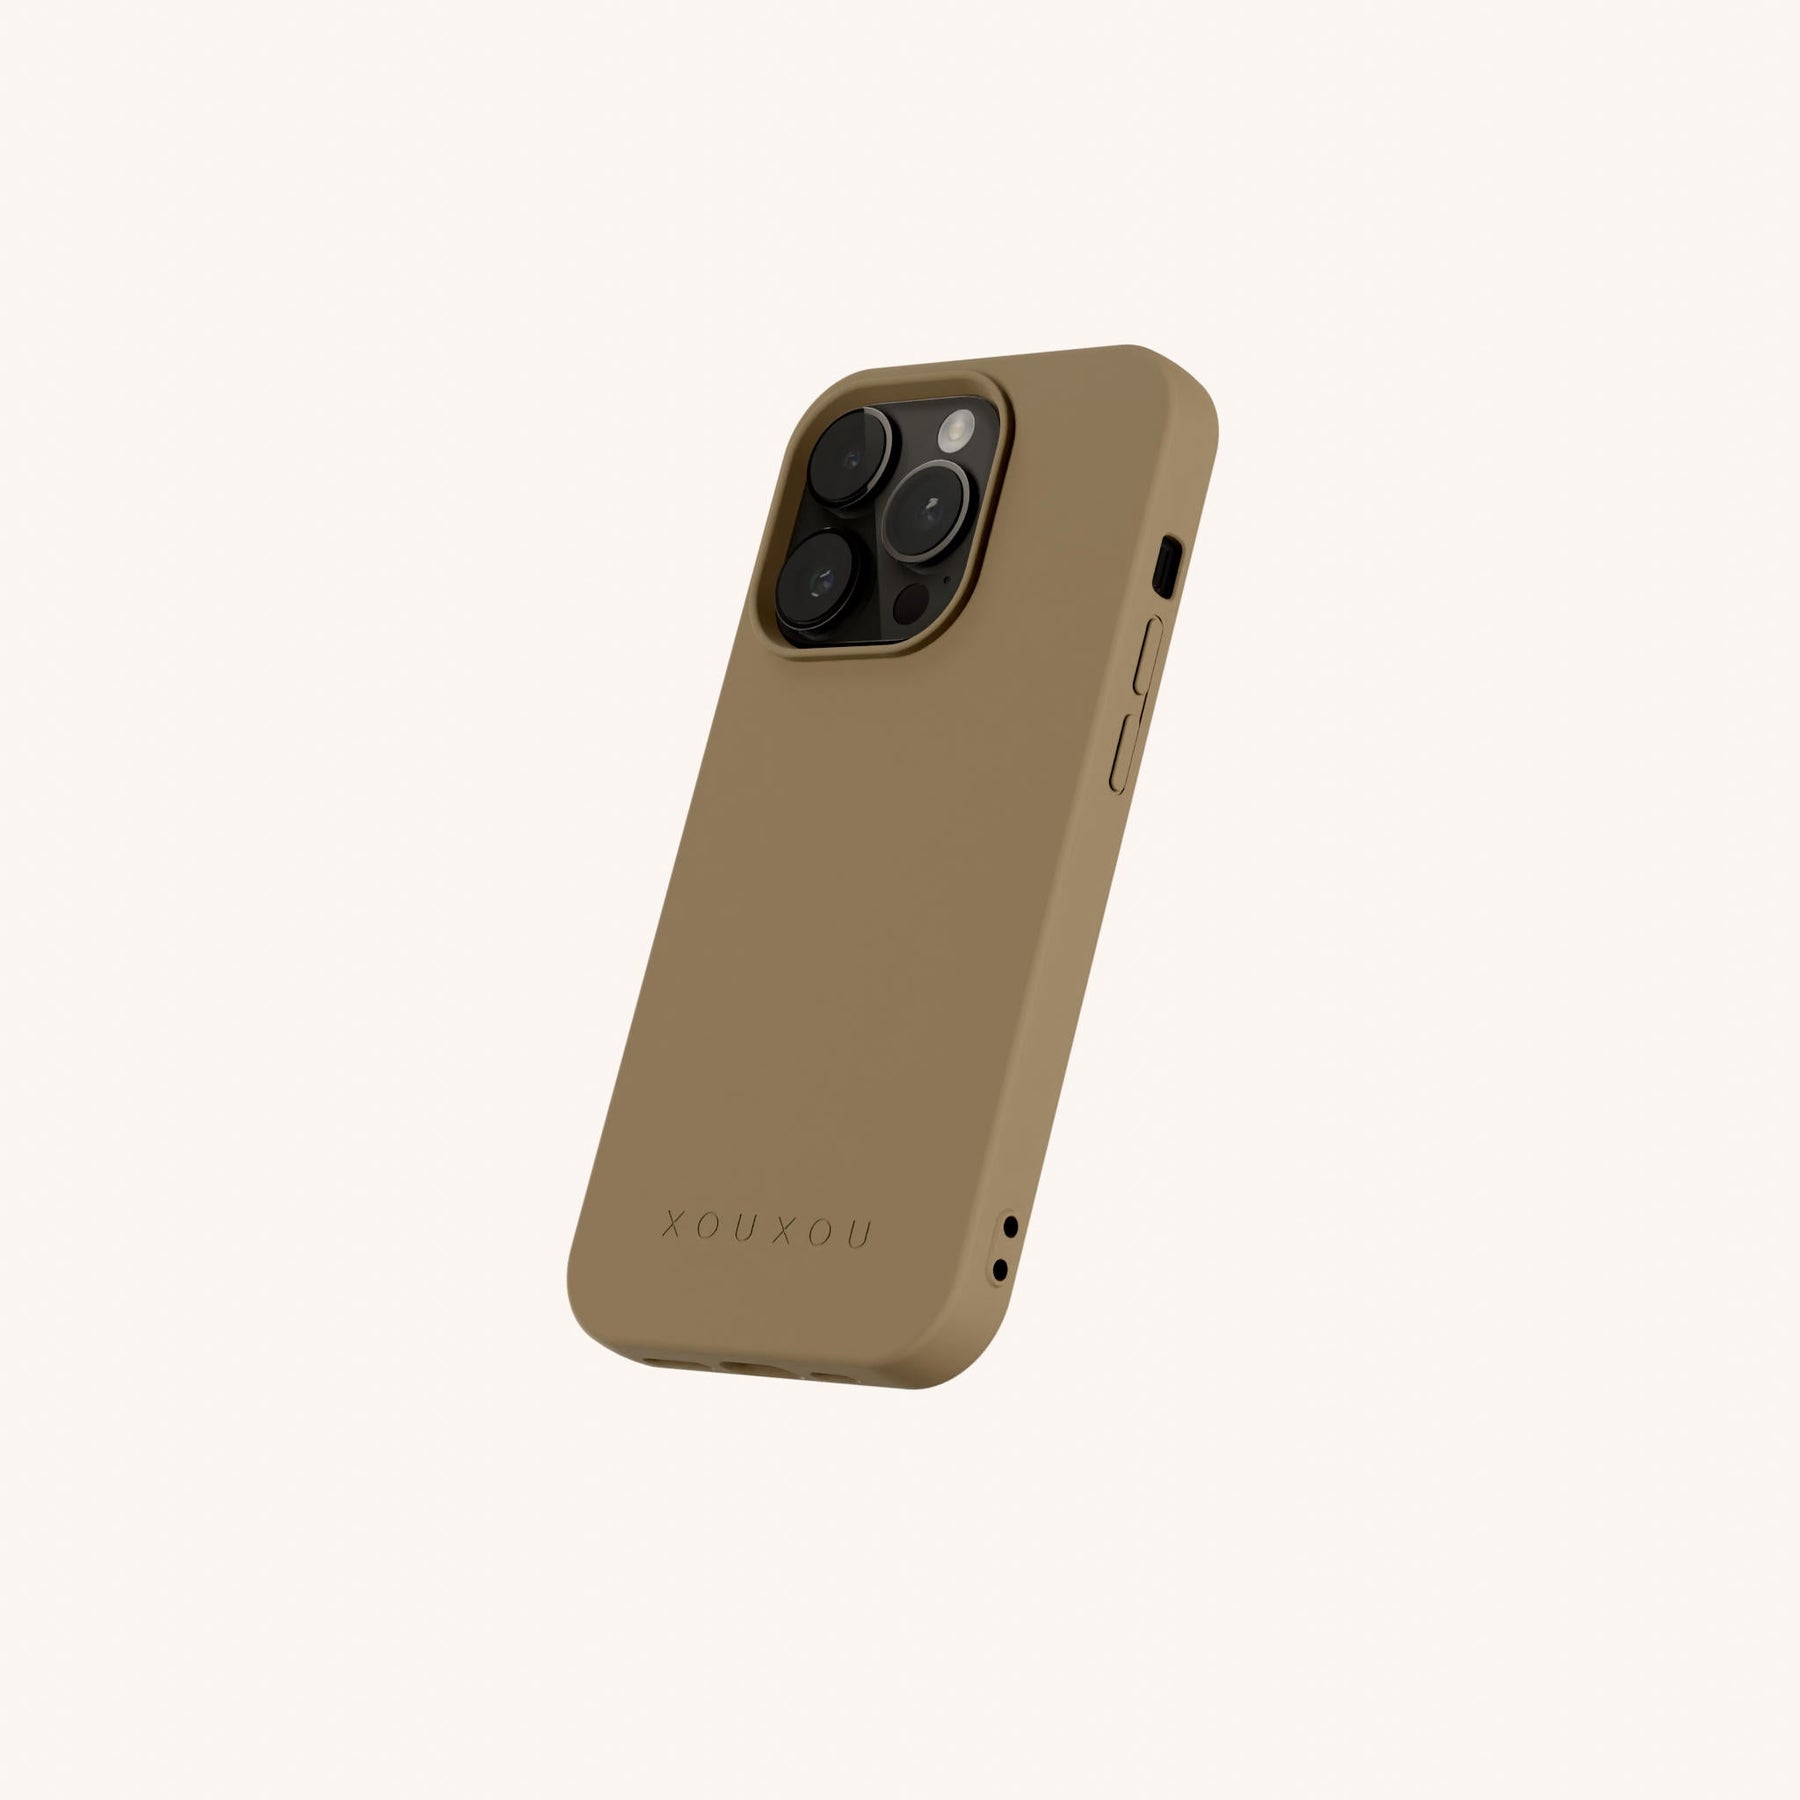 Phone Case in Taupe